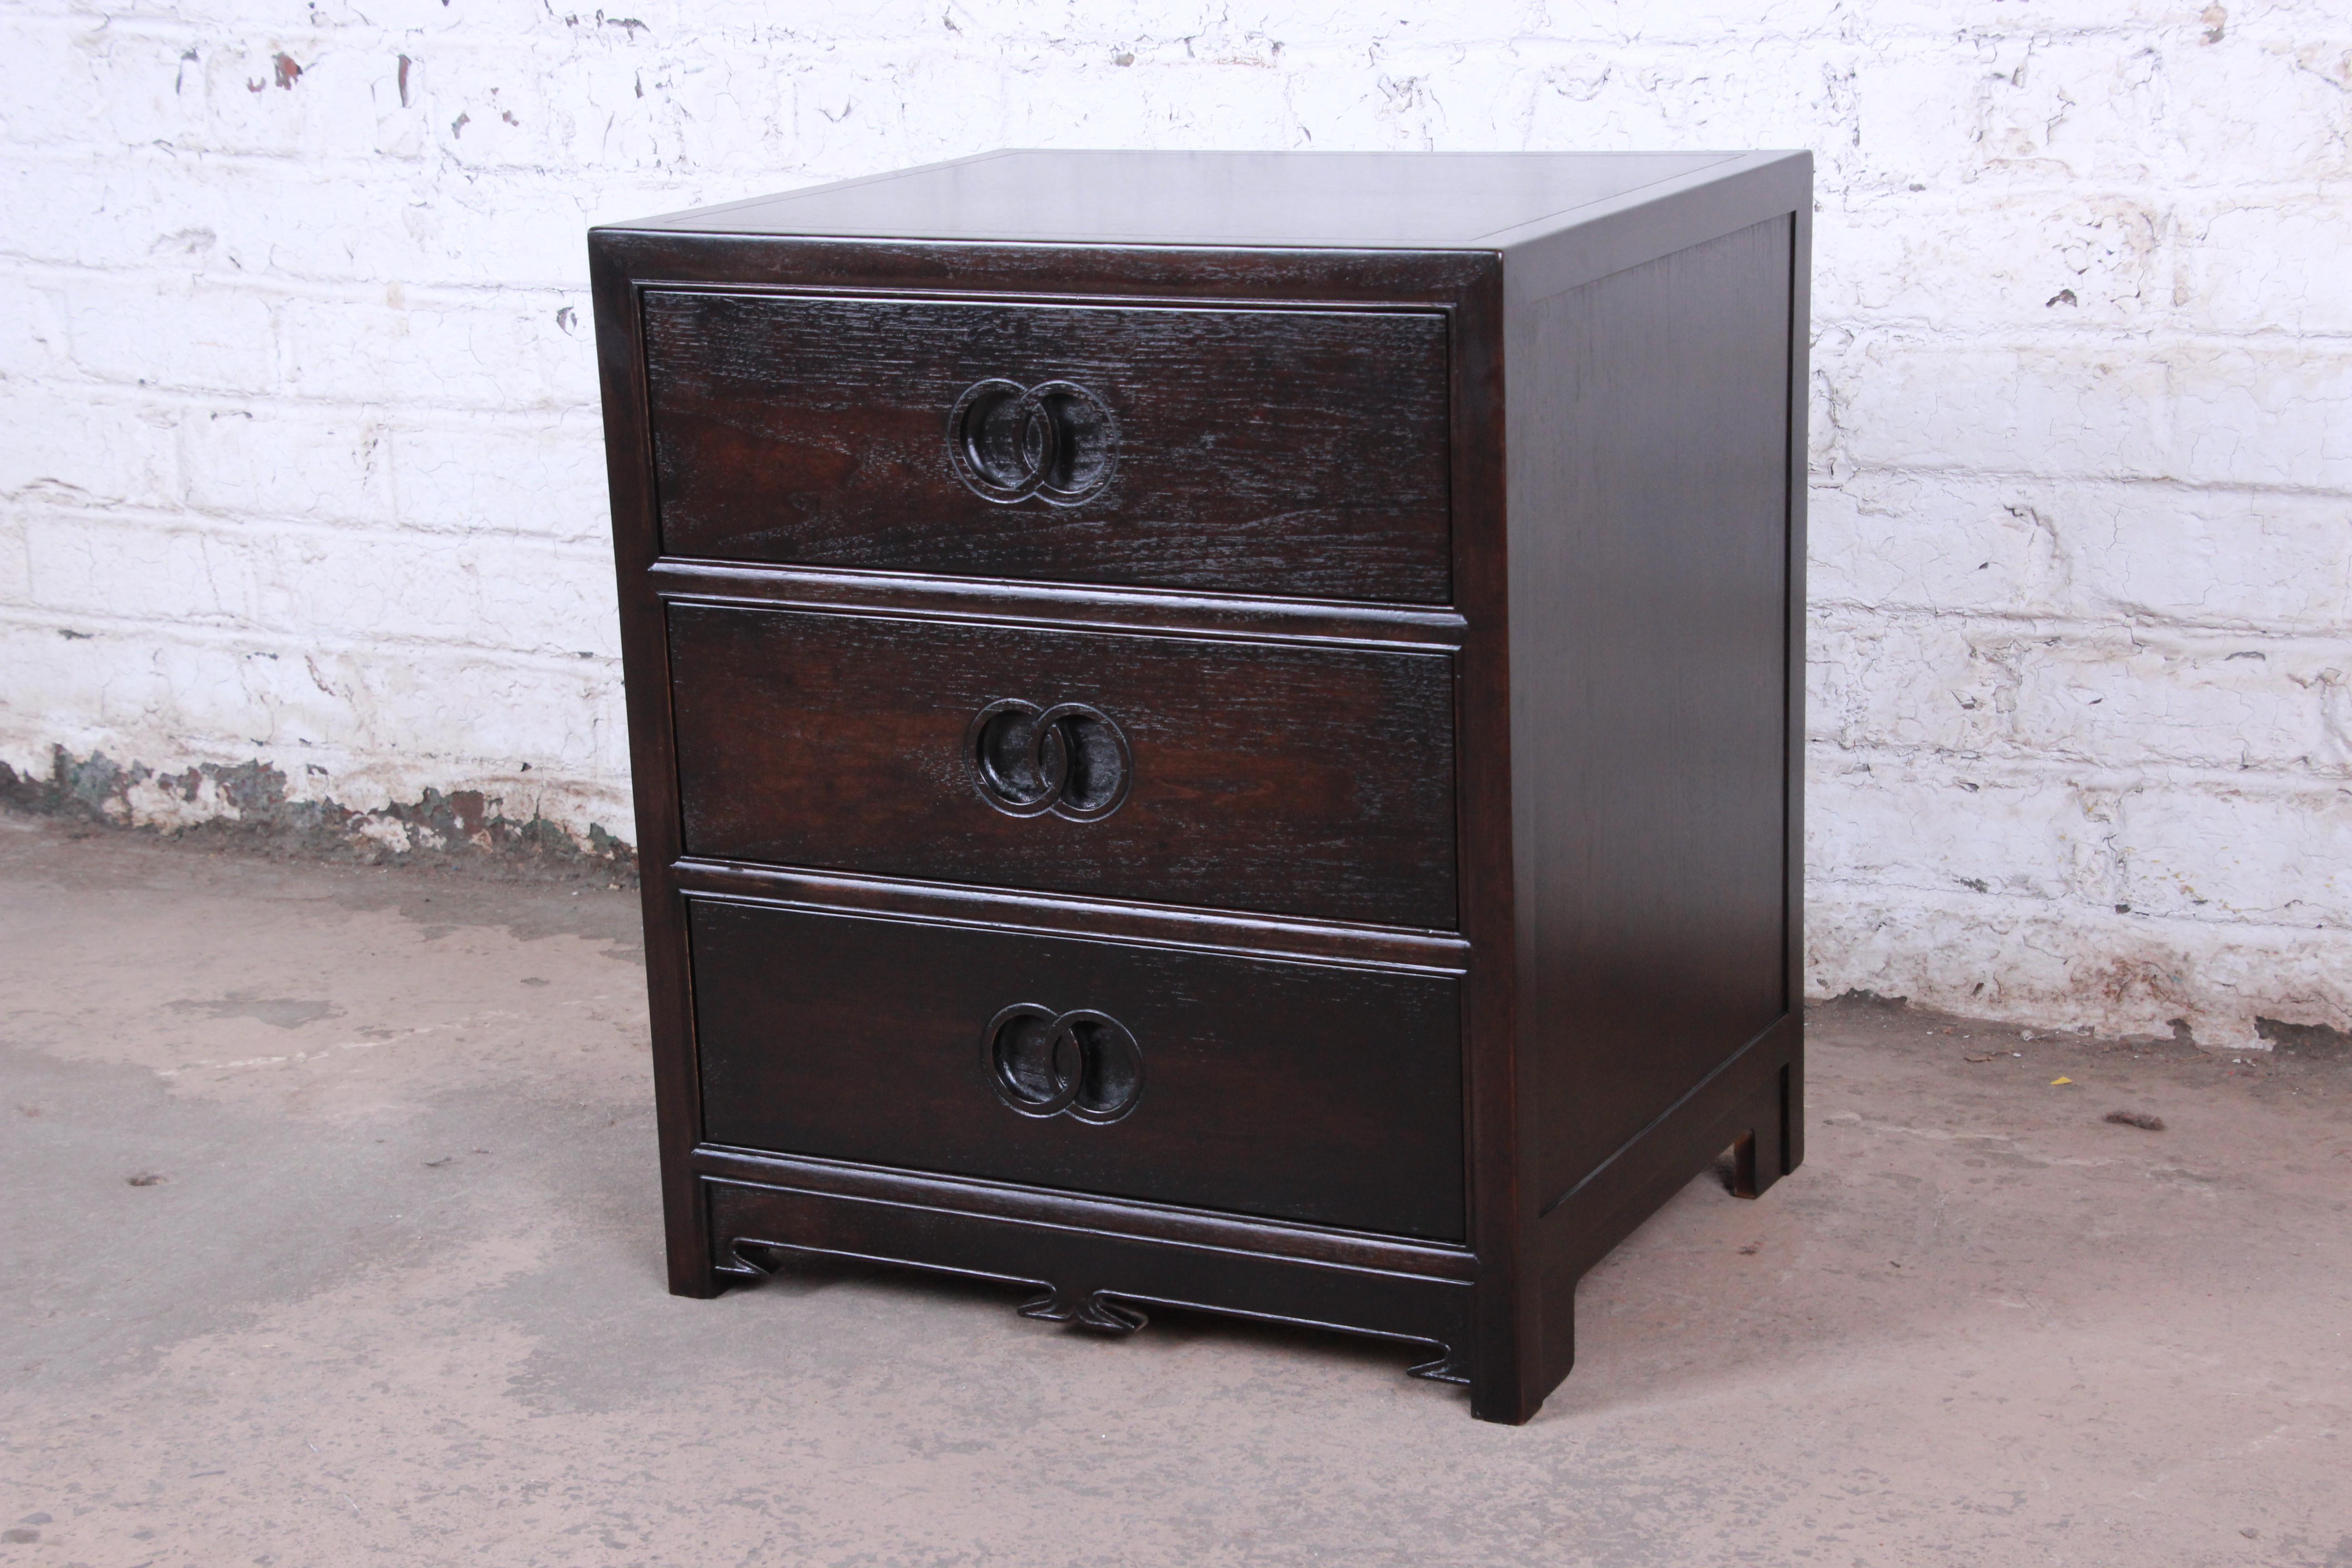 A beautiful, newly refinished Hollywood Regency chinoiserie three-drawer bachelor chest or nightstand designed by Michael Taylor for his Far East Collection for Baker Furniture. The chest features gorgeous wood grain, Taylor's iconic carved